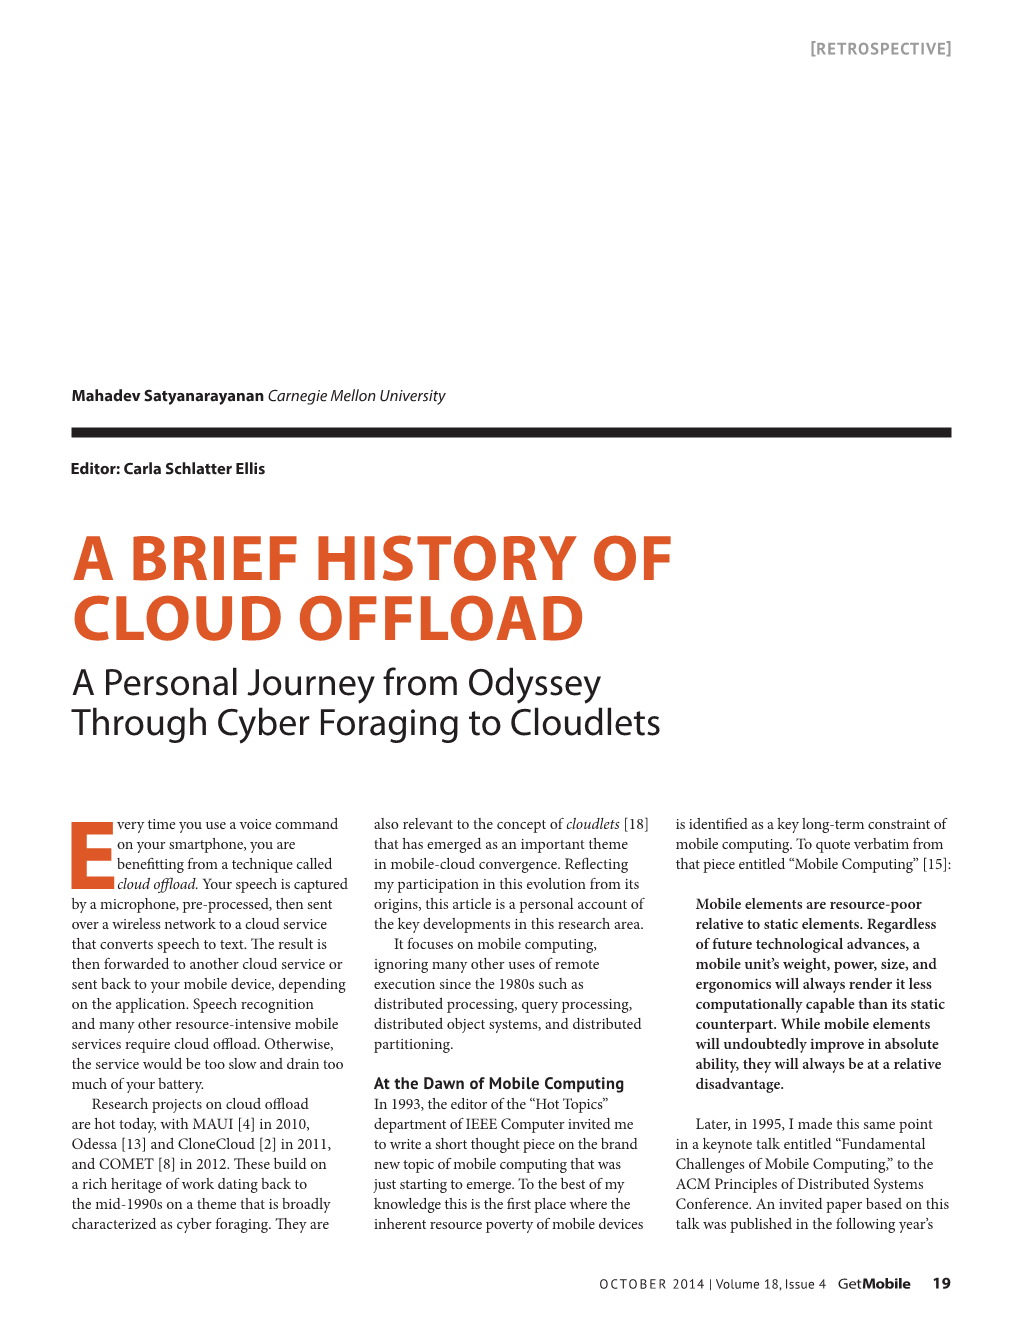 A Brief History of Cloud Offload a Personal Journey from Odyssey Through Cyber Foraging to Cloudlets